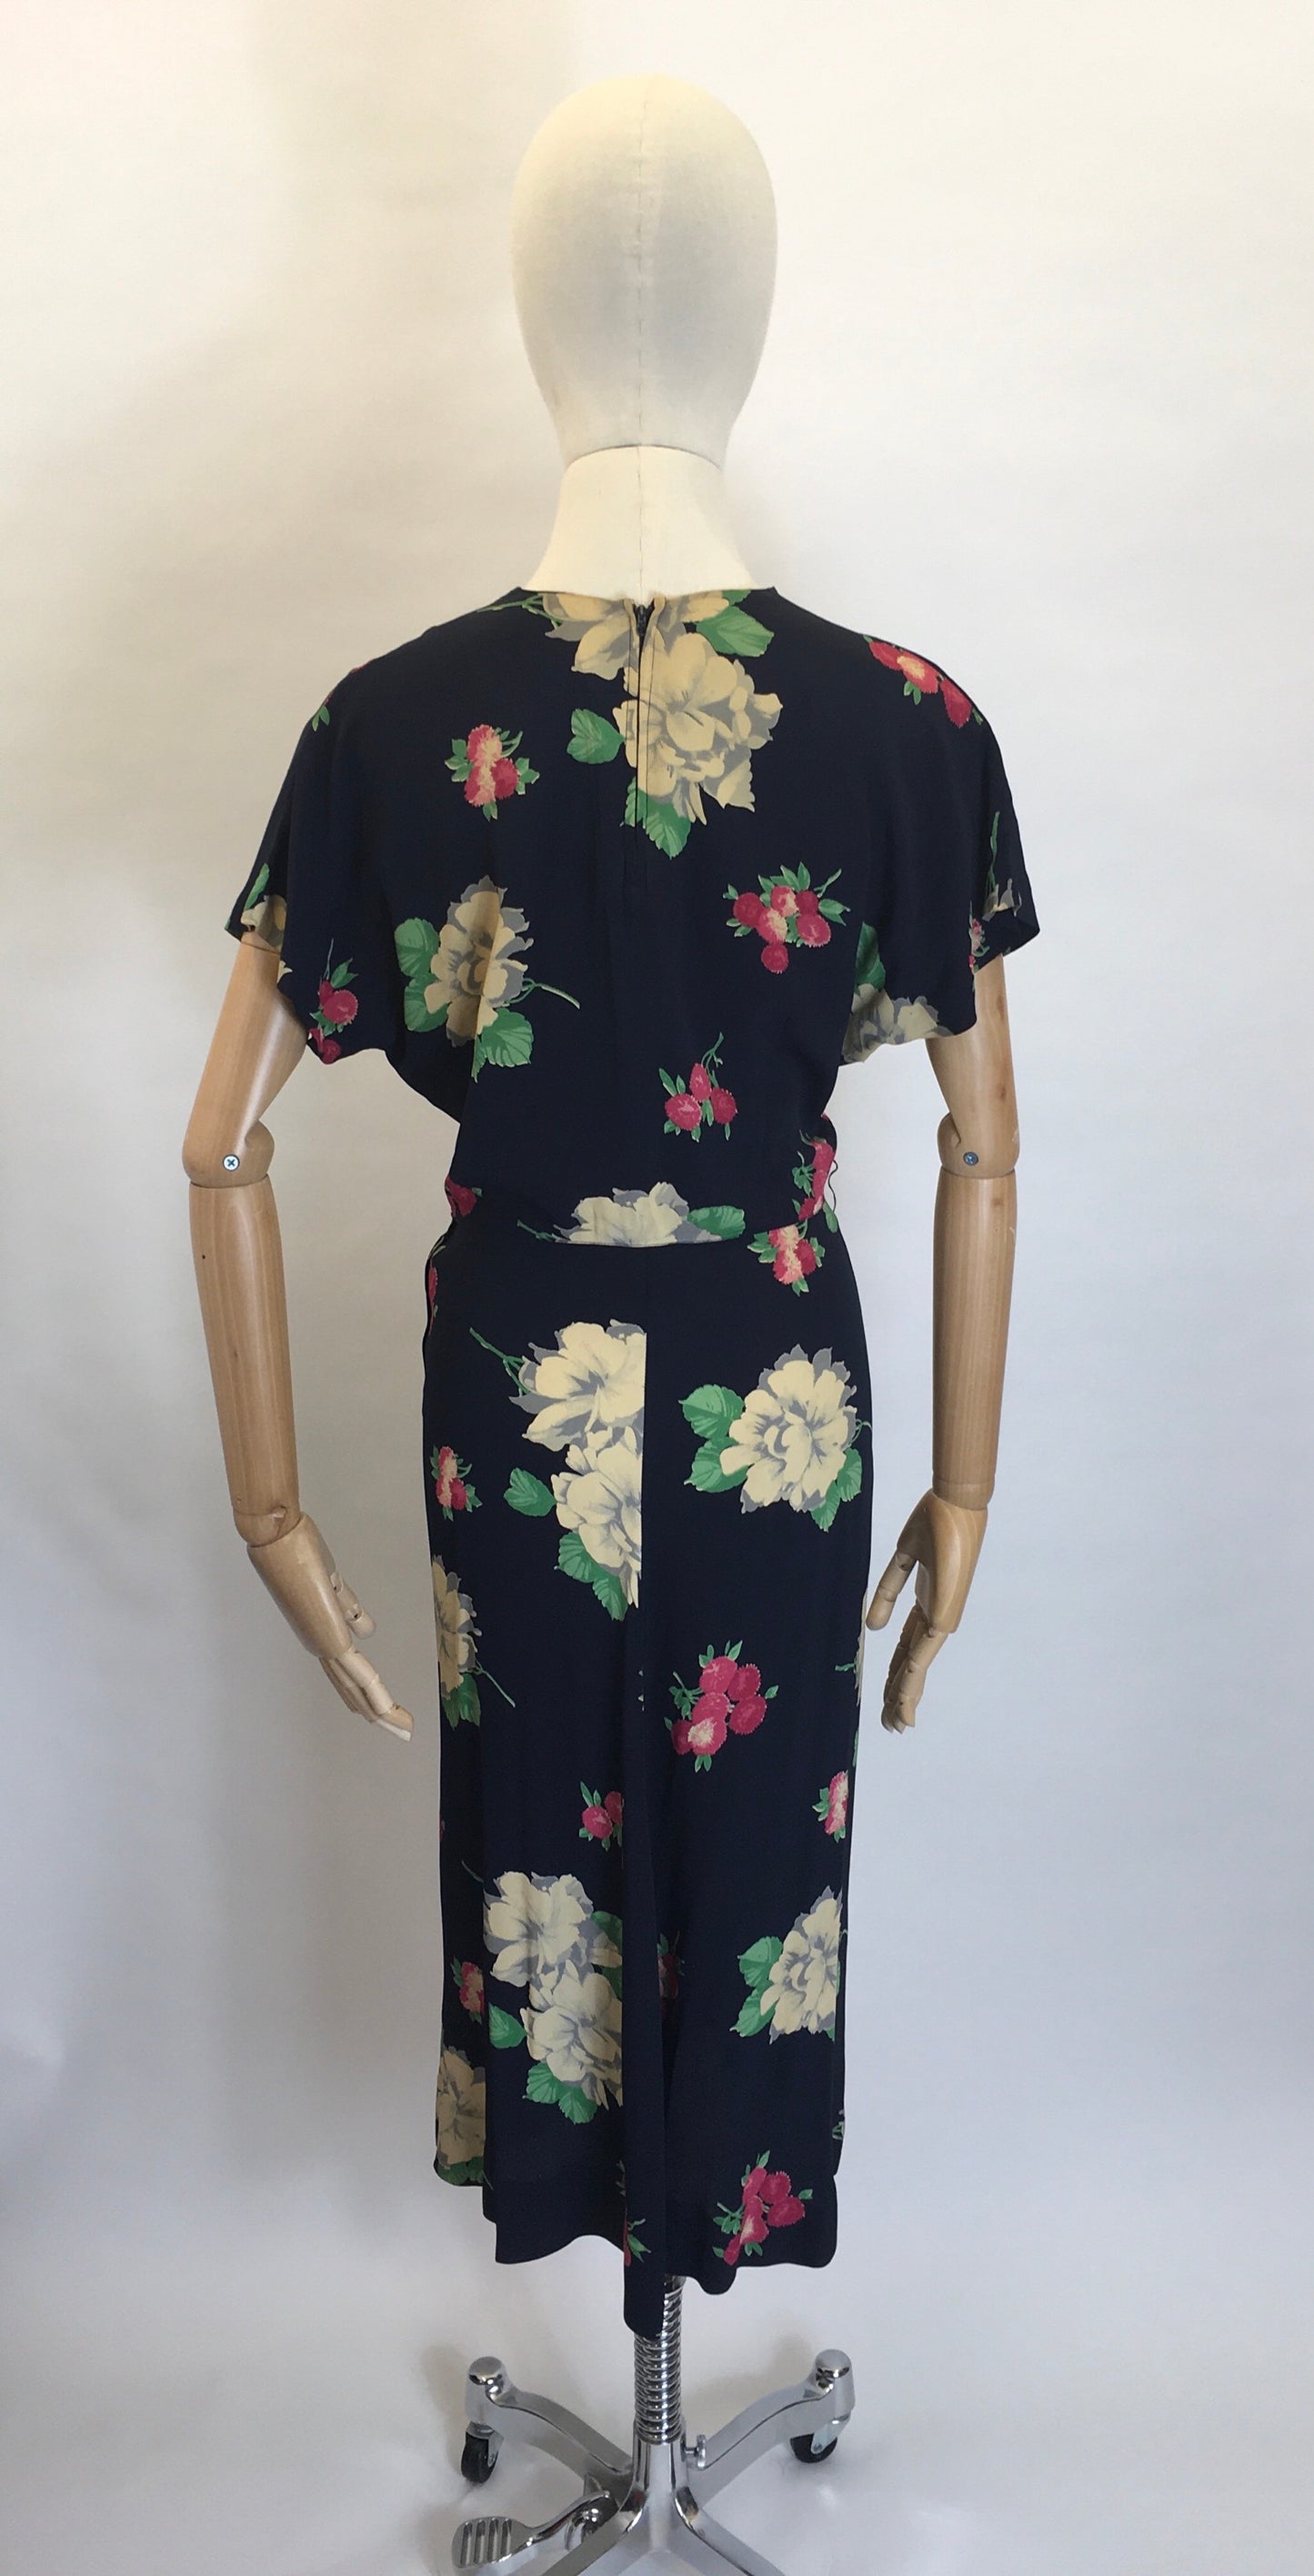 Original 1940's Stunning Floral Rayon Dress - Darling Whimsical Colour Pallet